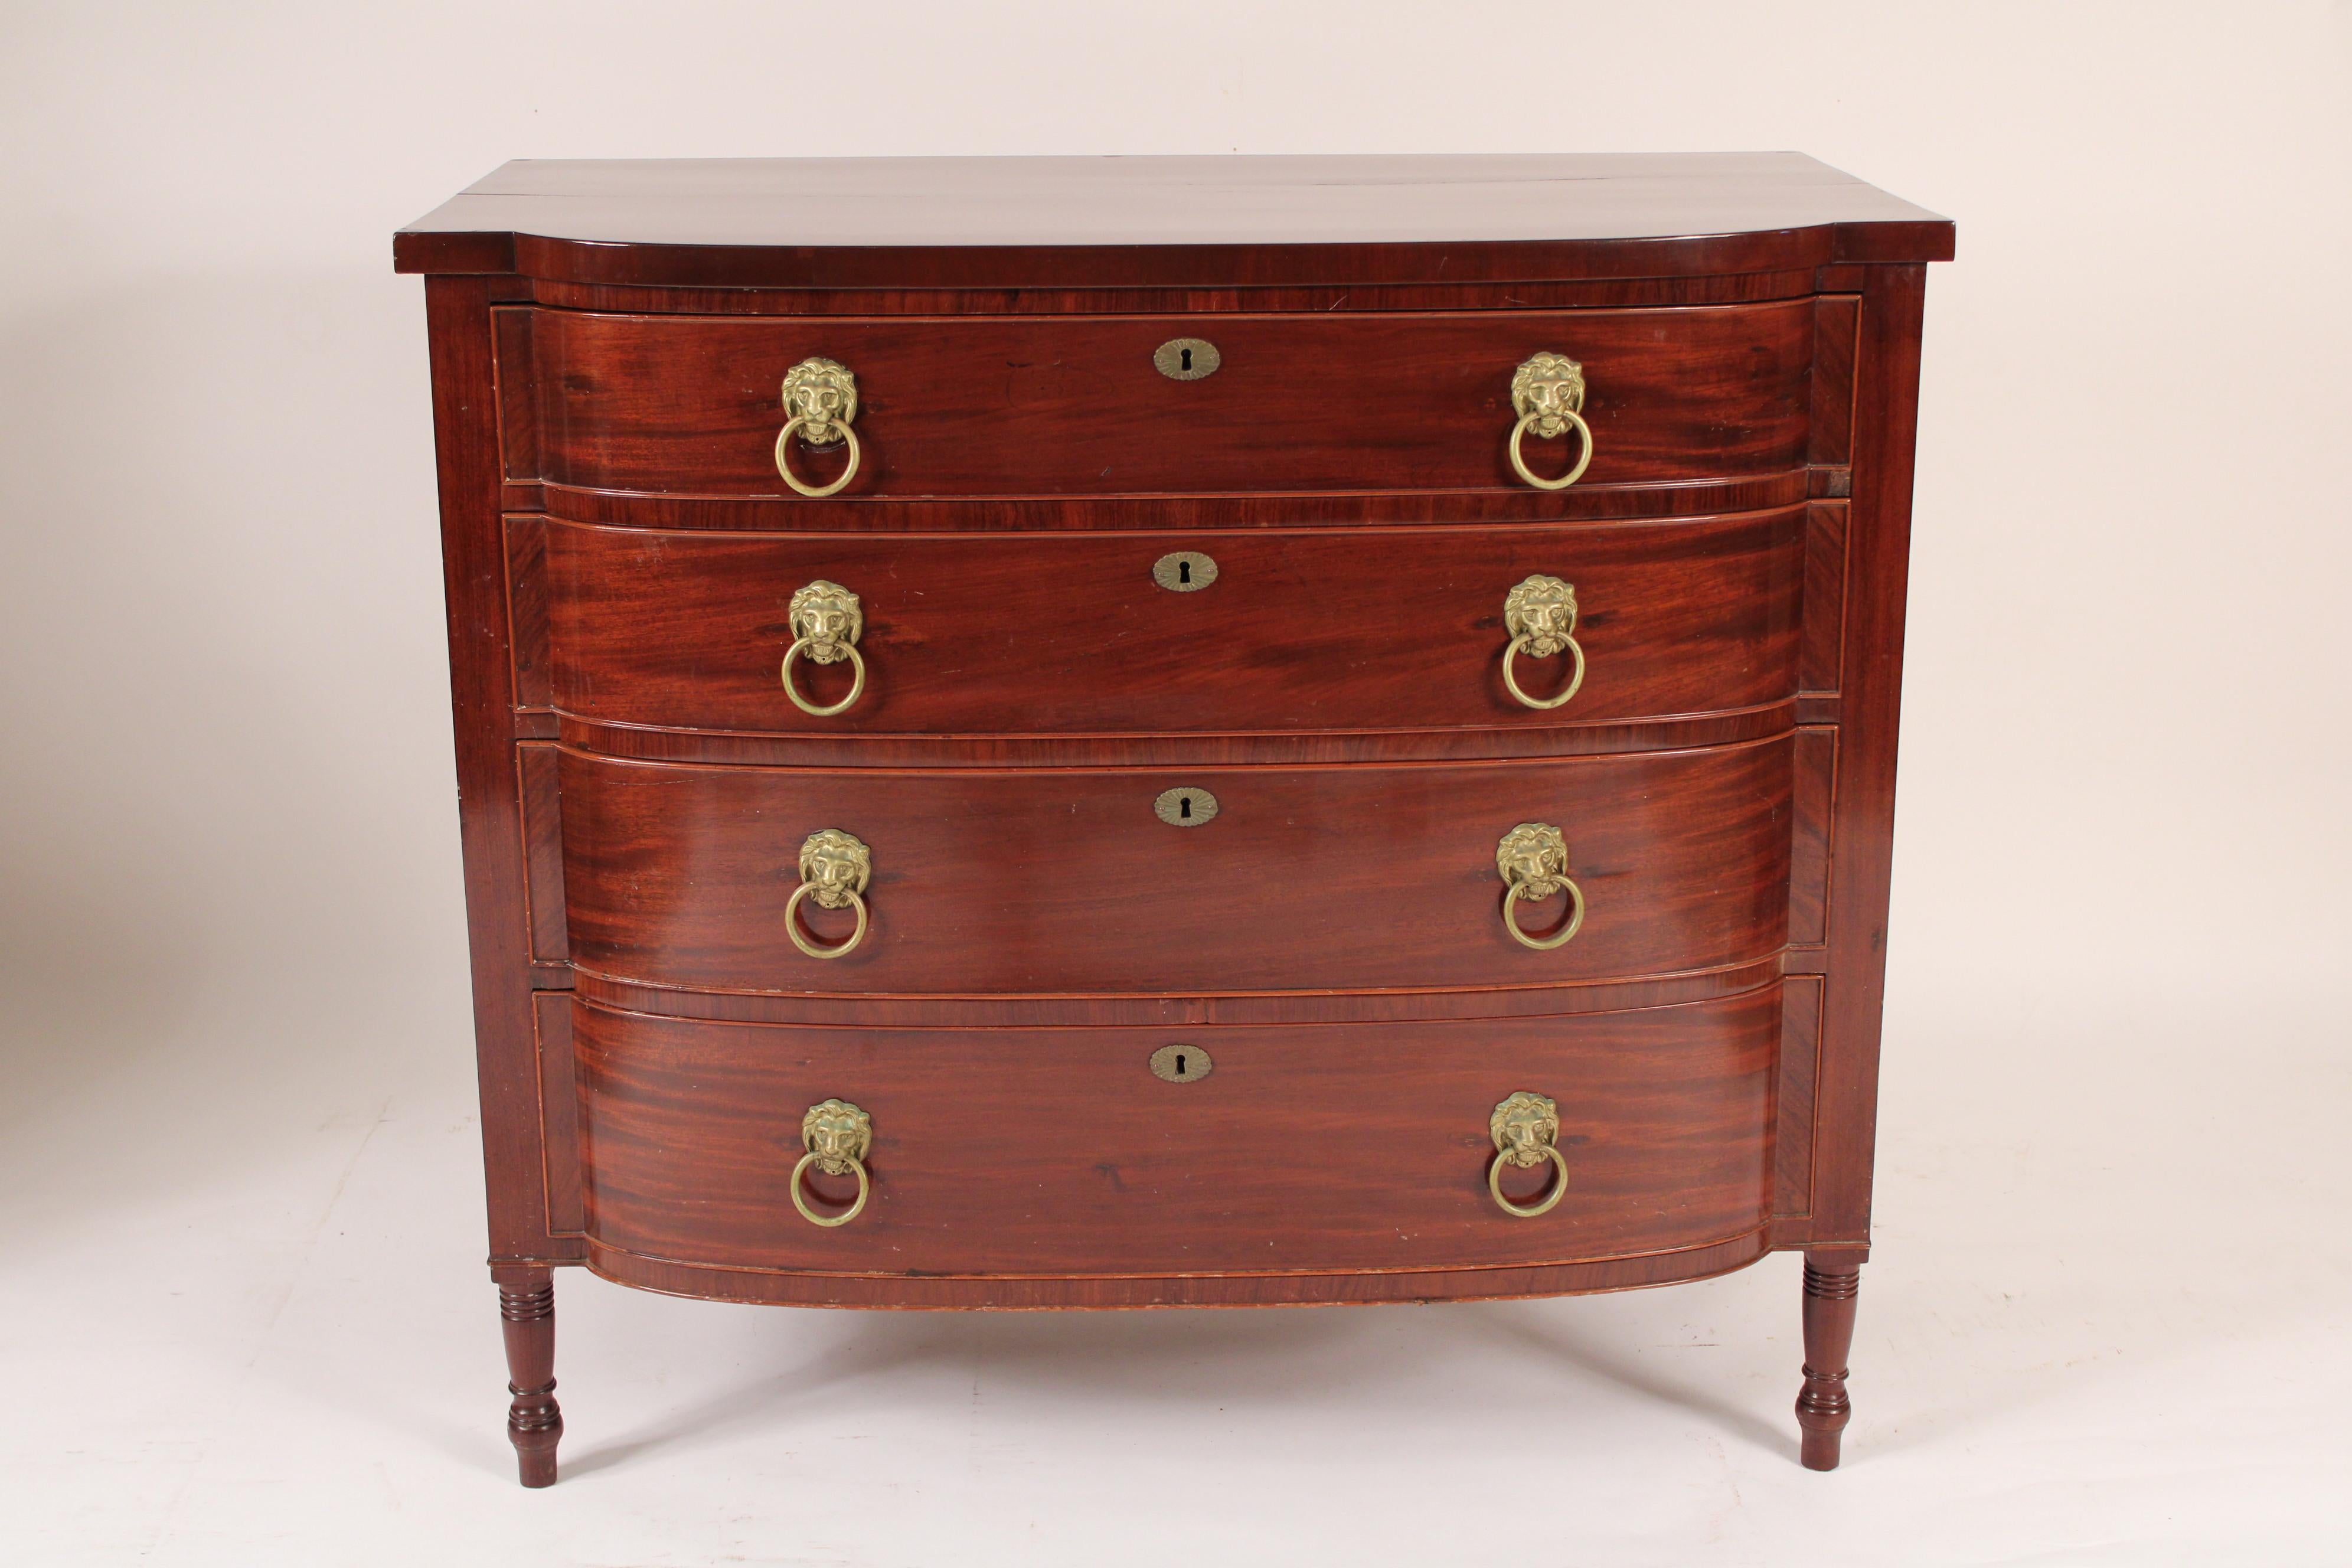 English Regency mahogany 4 drawer chest of drawers, circa 1820. With a D shaped overhanging top over 4 drawers with lion mask and ring drawer pulls resting on turned feet.
Hand dove tailed drawer construction.